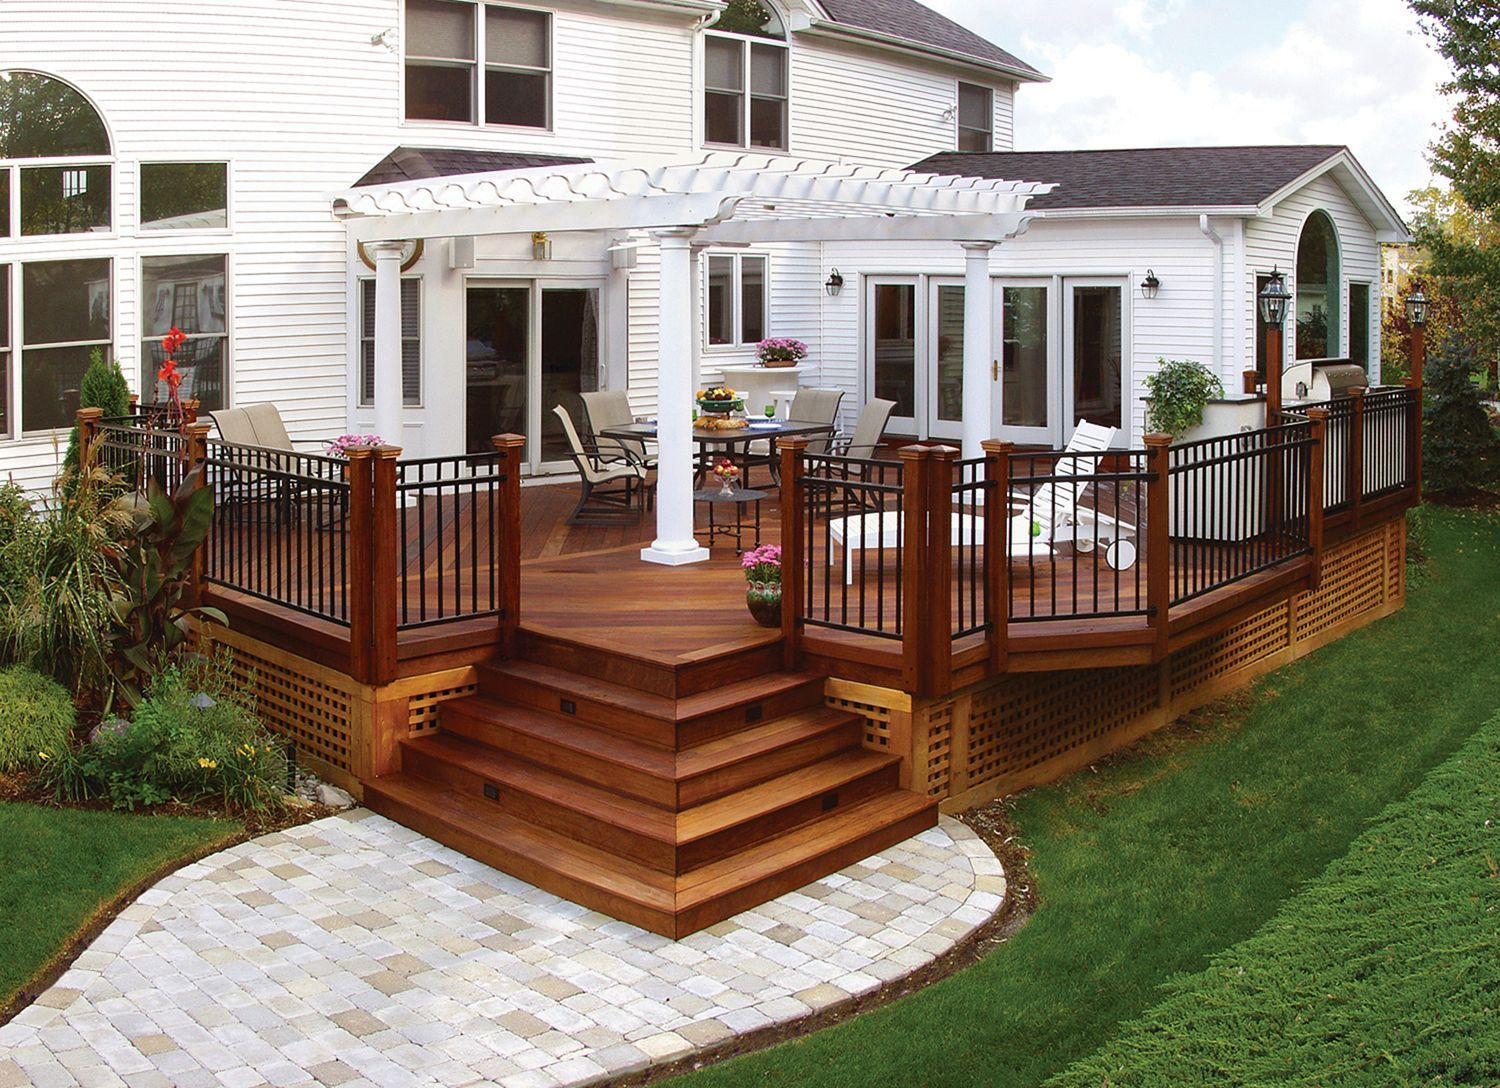 50 Incredible Front Porch With Wooden Ipe Deck Ideas 300 pertaining to size 1500 X 1088